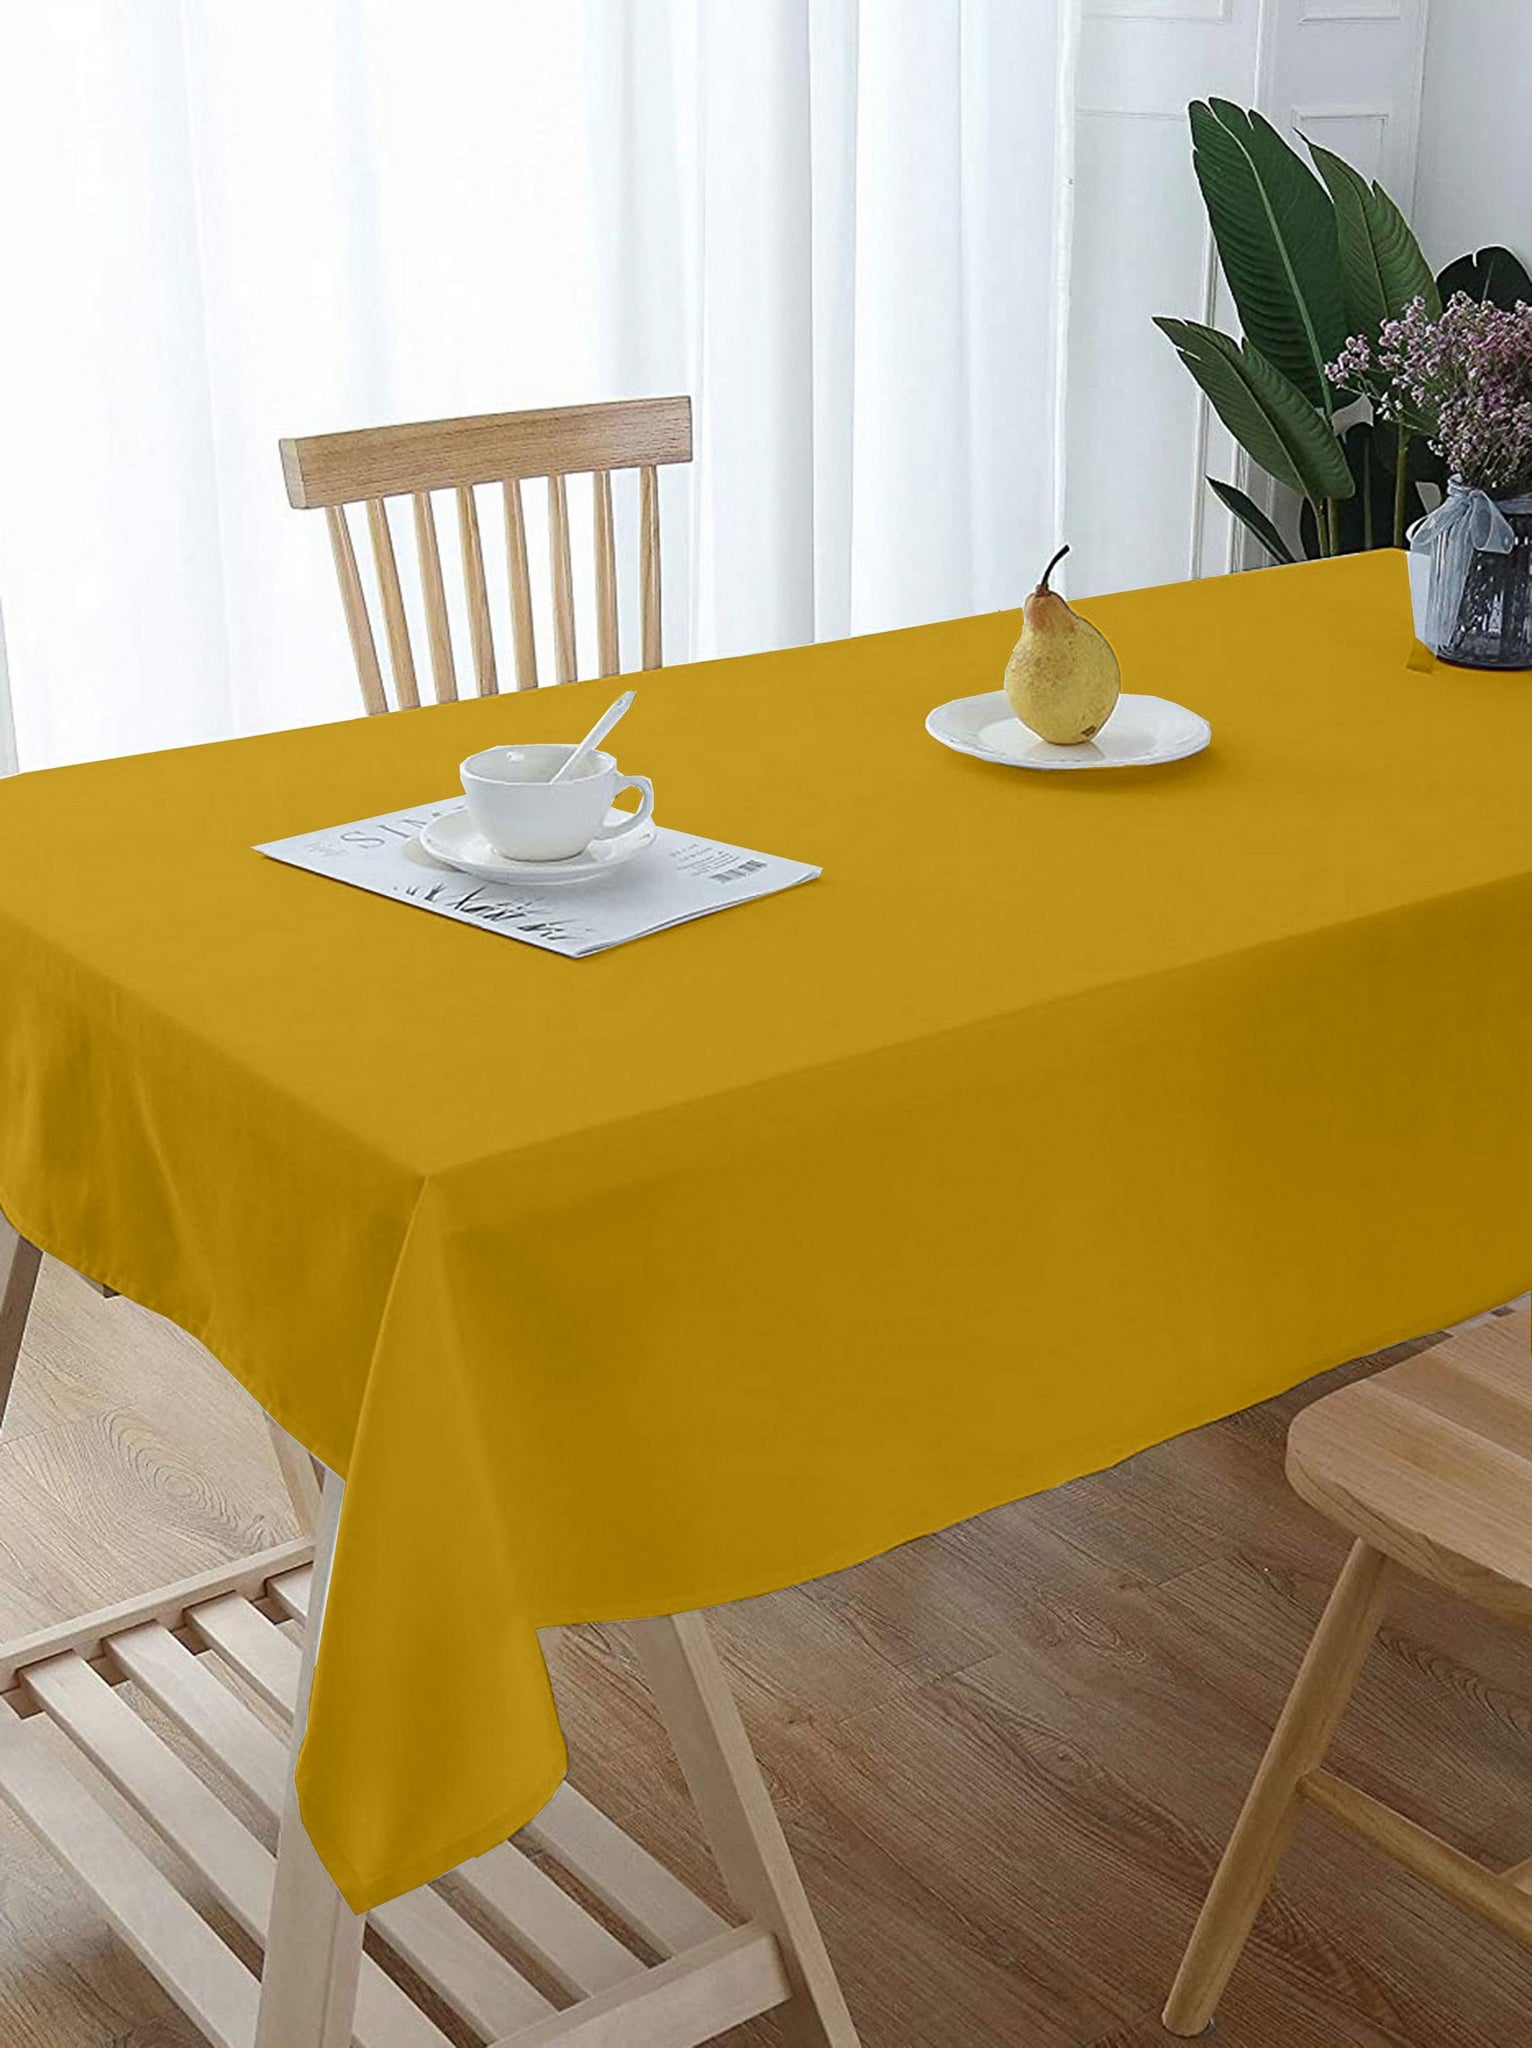 Lushomes center table cover, Dark Yellow, Classic Plain Dining Table Cover Cloth (Size 36 x 60”, Center Table Cloth)